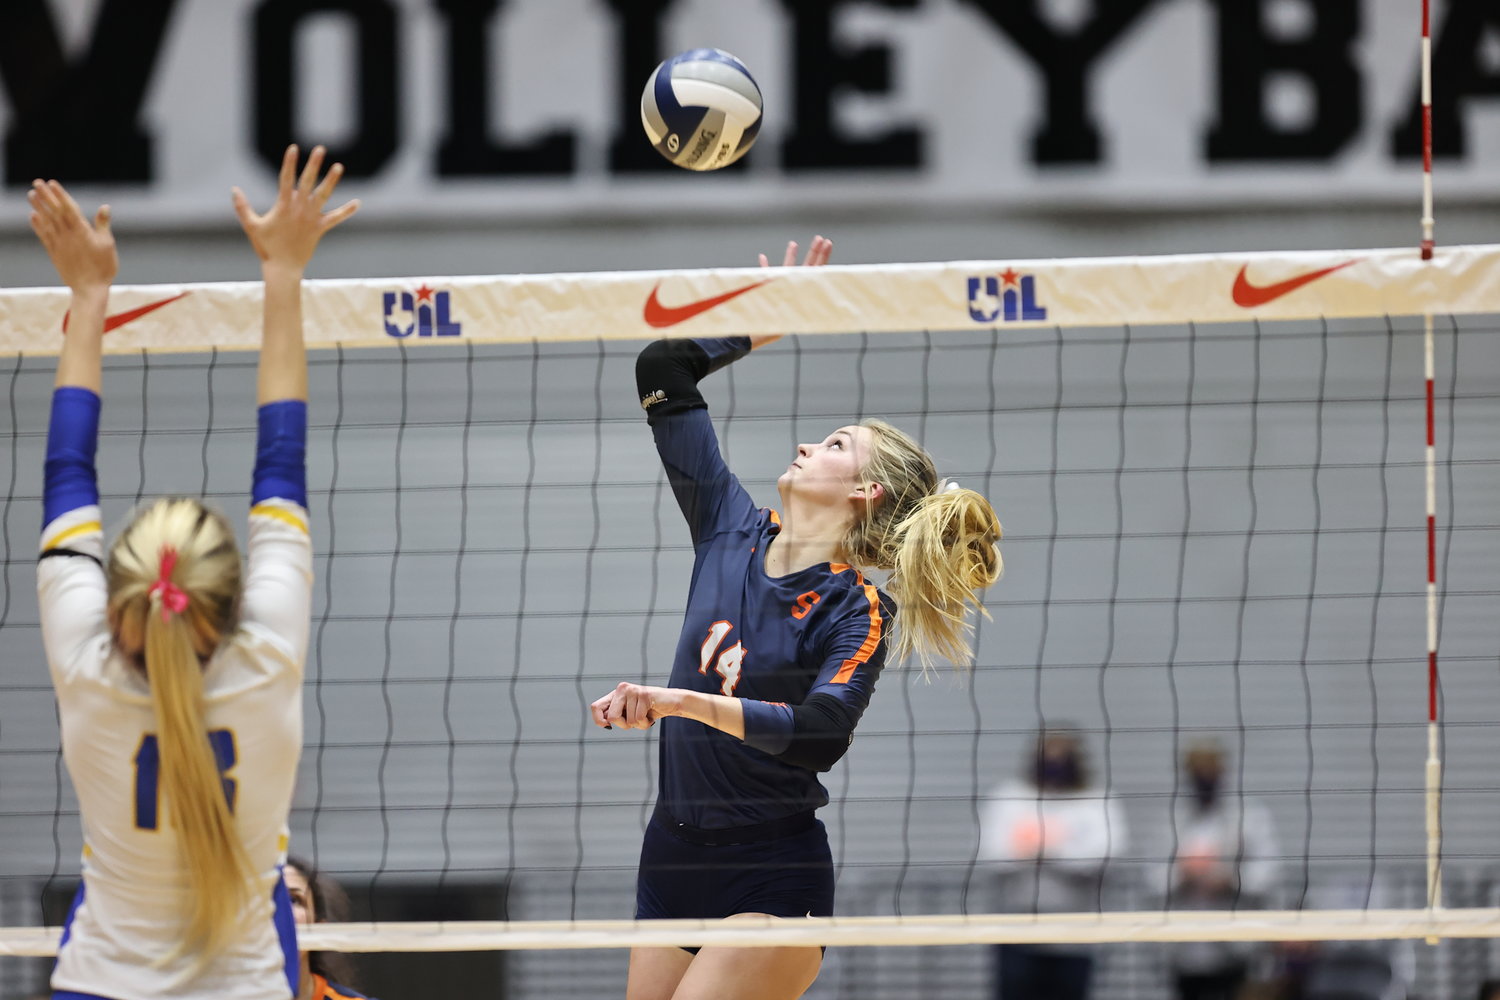 Seven Lakes senior Ally Batenhorst rises for an attack during the Spartans' Class 6A state championship match over Klein on Dec. 12 at the Culwell Center in Garland.